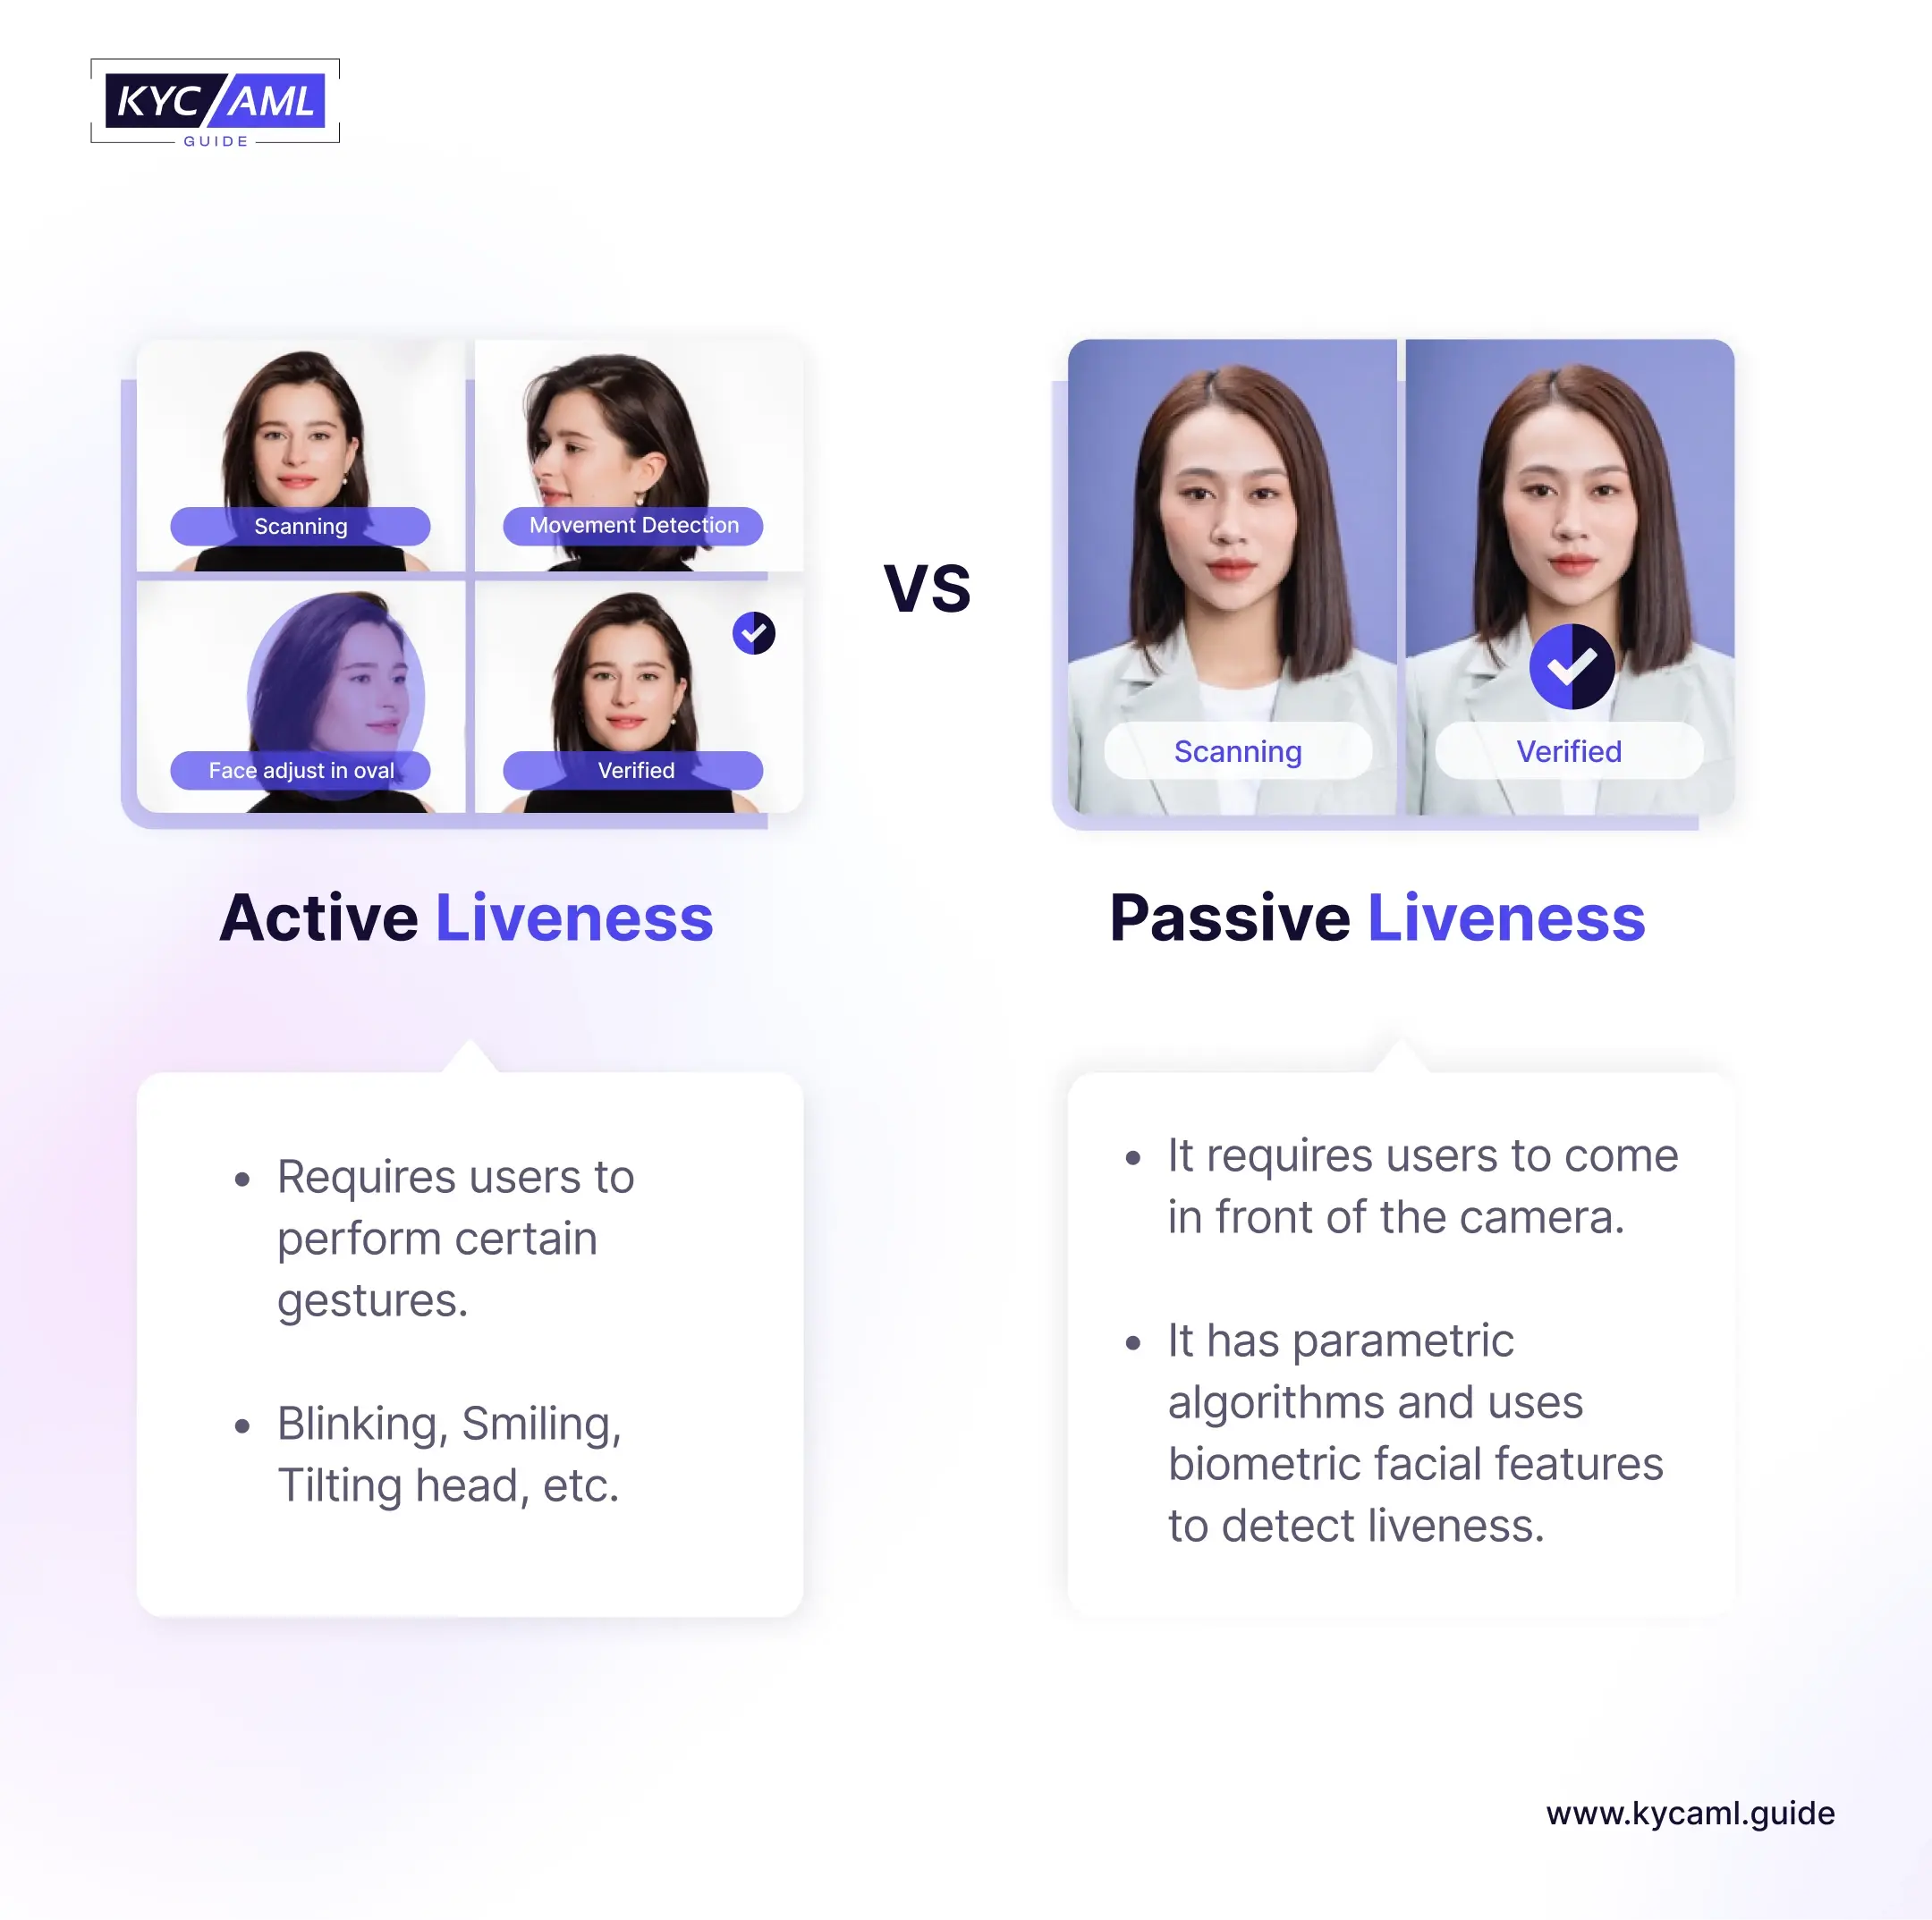 The image shows the basic difference between Active Liveness and Passive Liveness